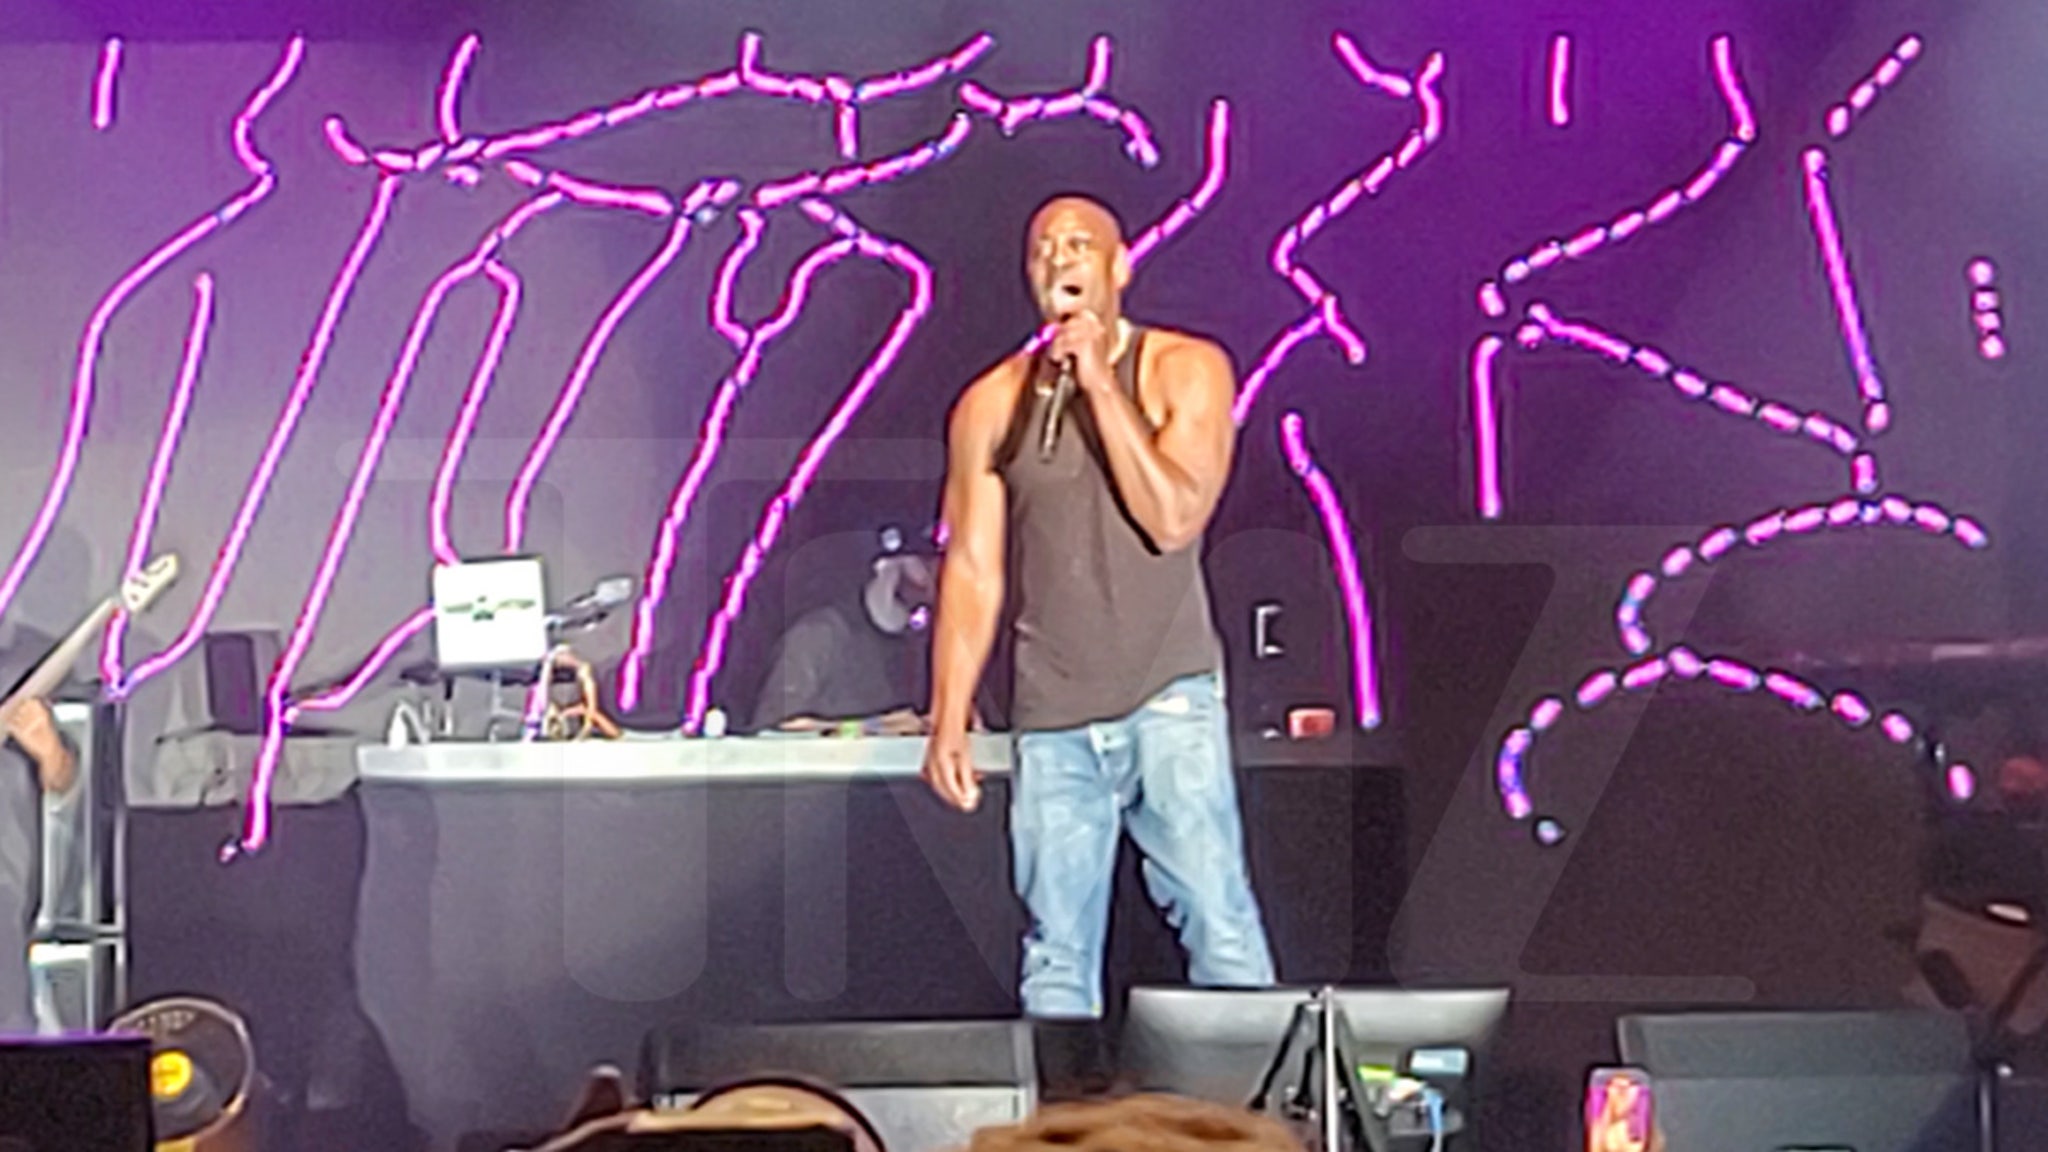 Dave Chappelle Raps at Ohio Music Festival After Snoop Dogg’s Set